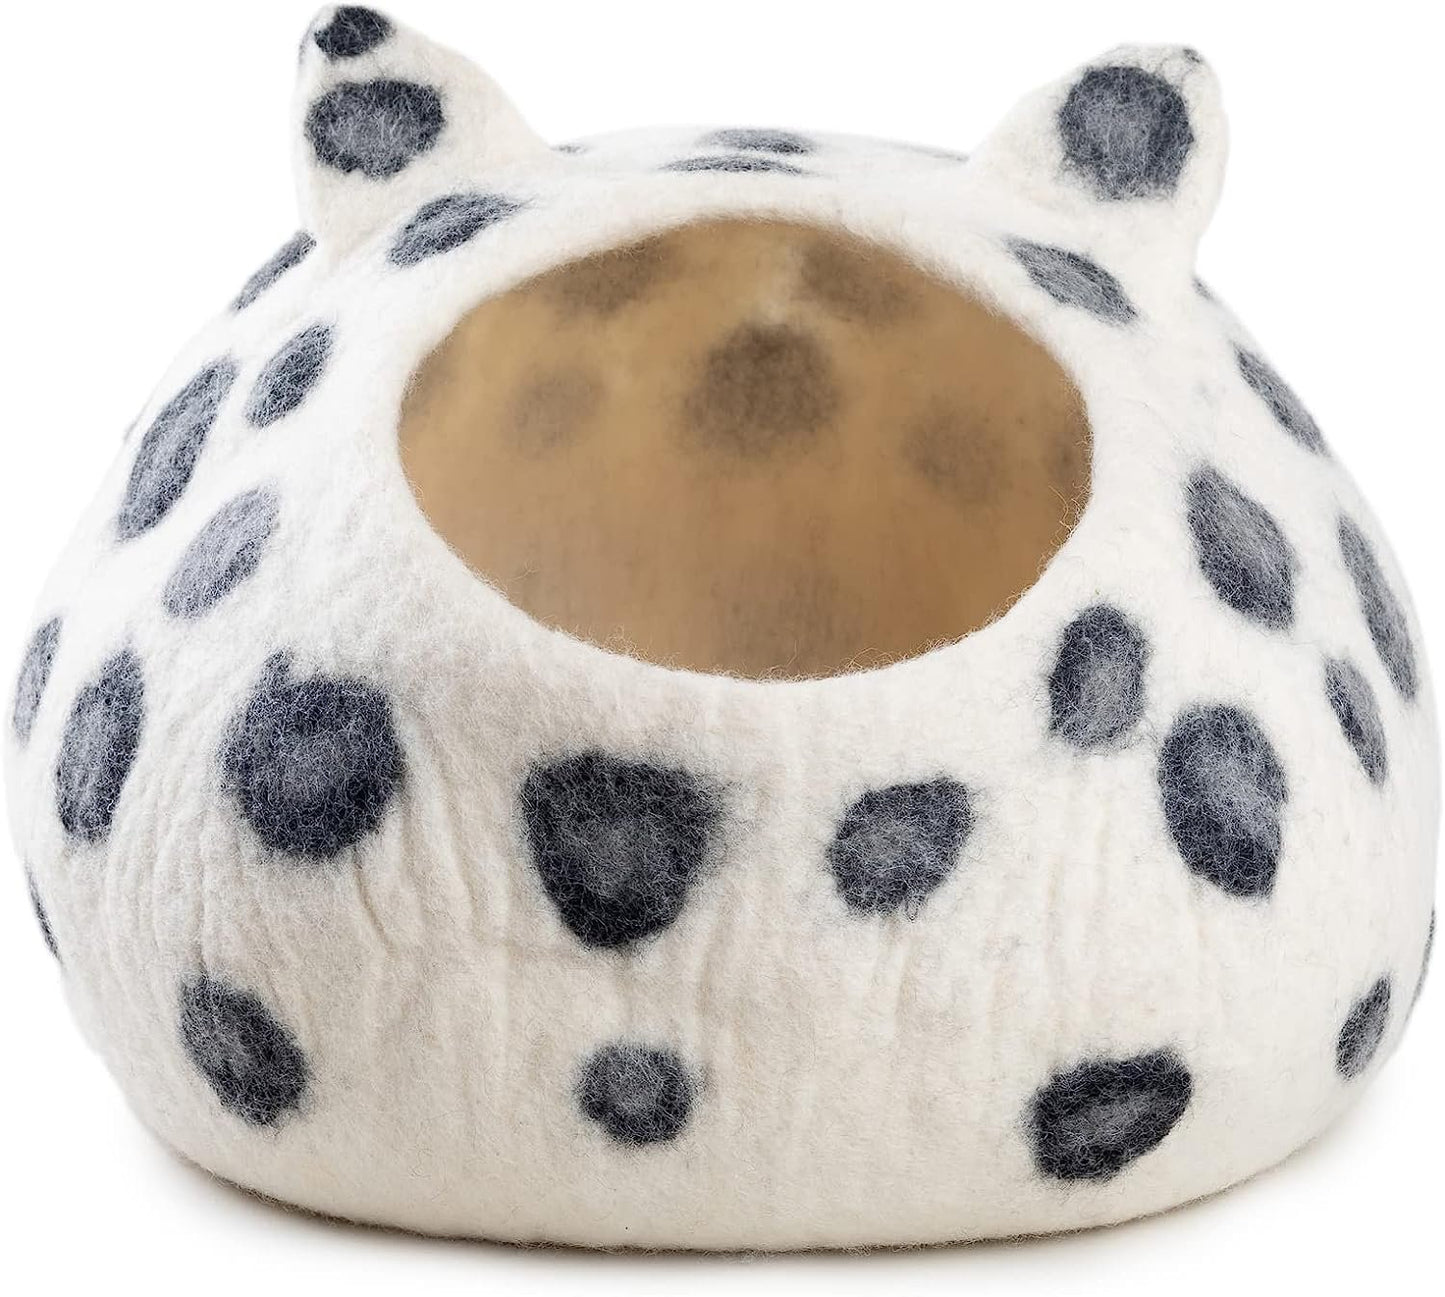 Woolygon Wool Cat Cave Bed - Handcrafted 100% Merino Wool, Eco-Friendly Felt Cat Cave for Indoor Cats and Kittens (Tabby Ears)